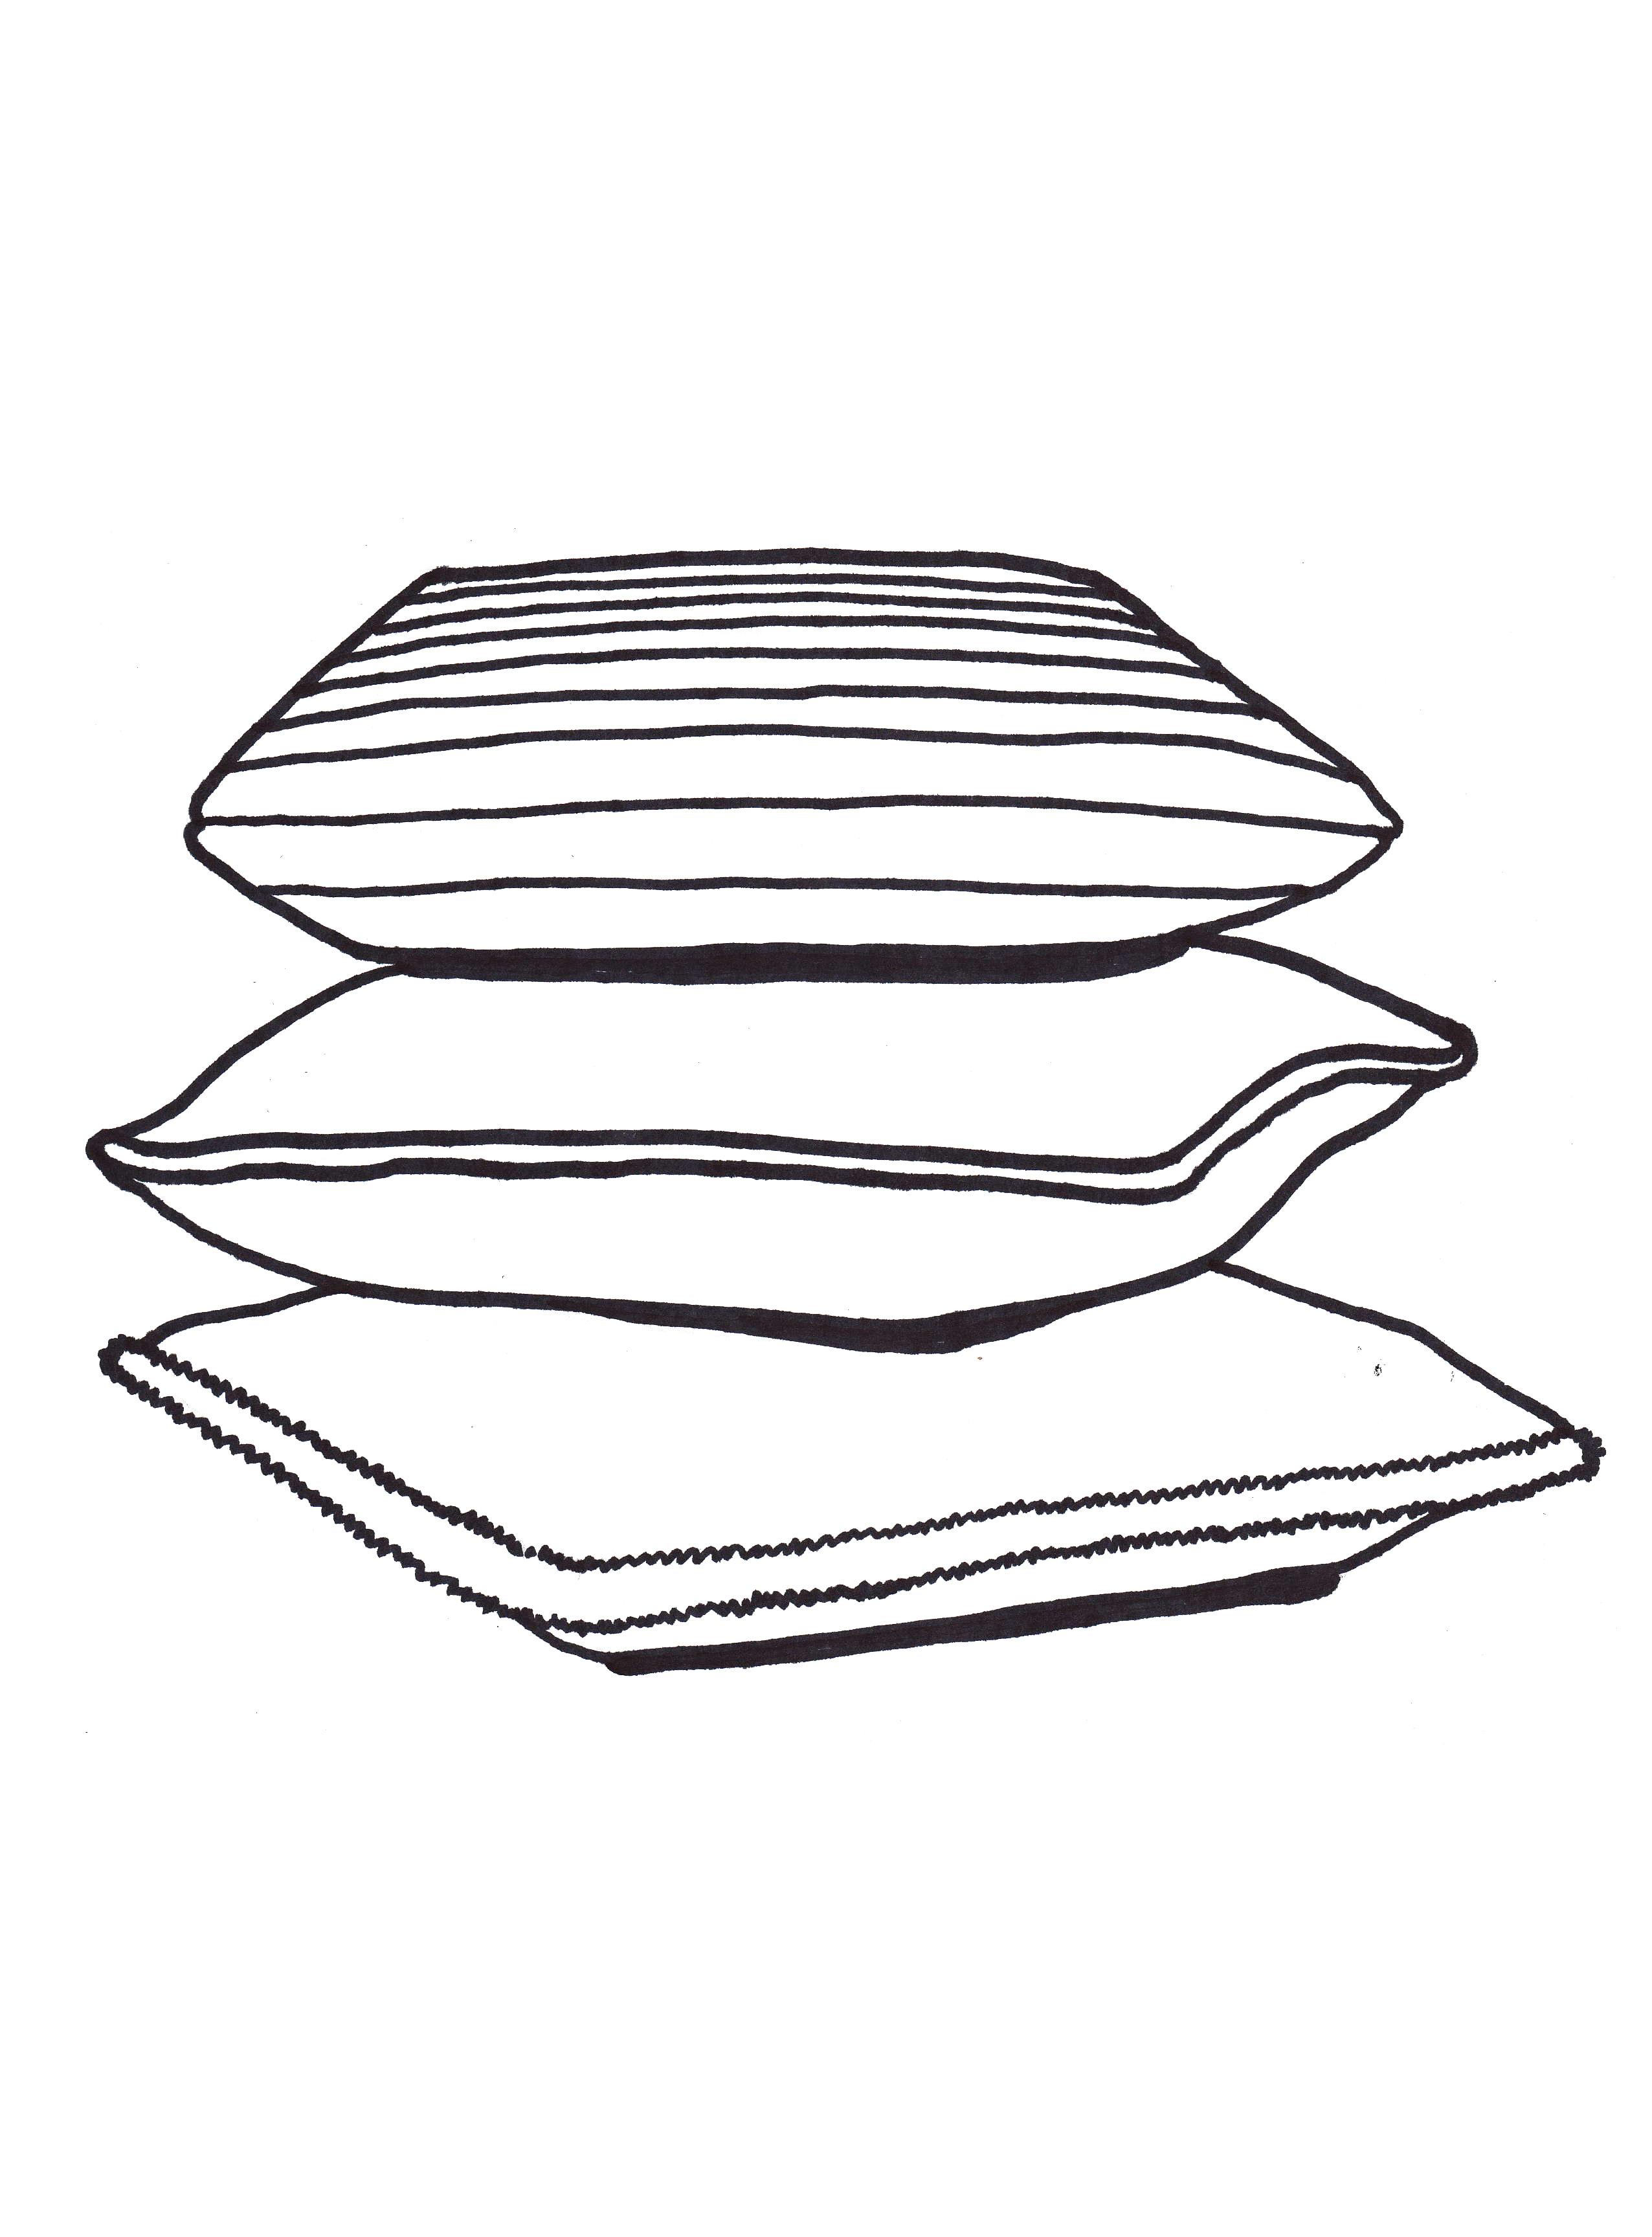 Interior design line drawing of a stack of pillows